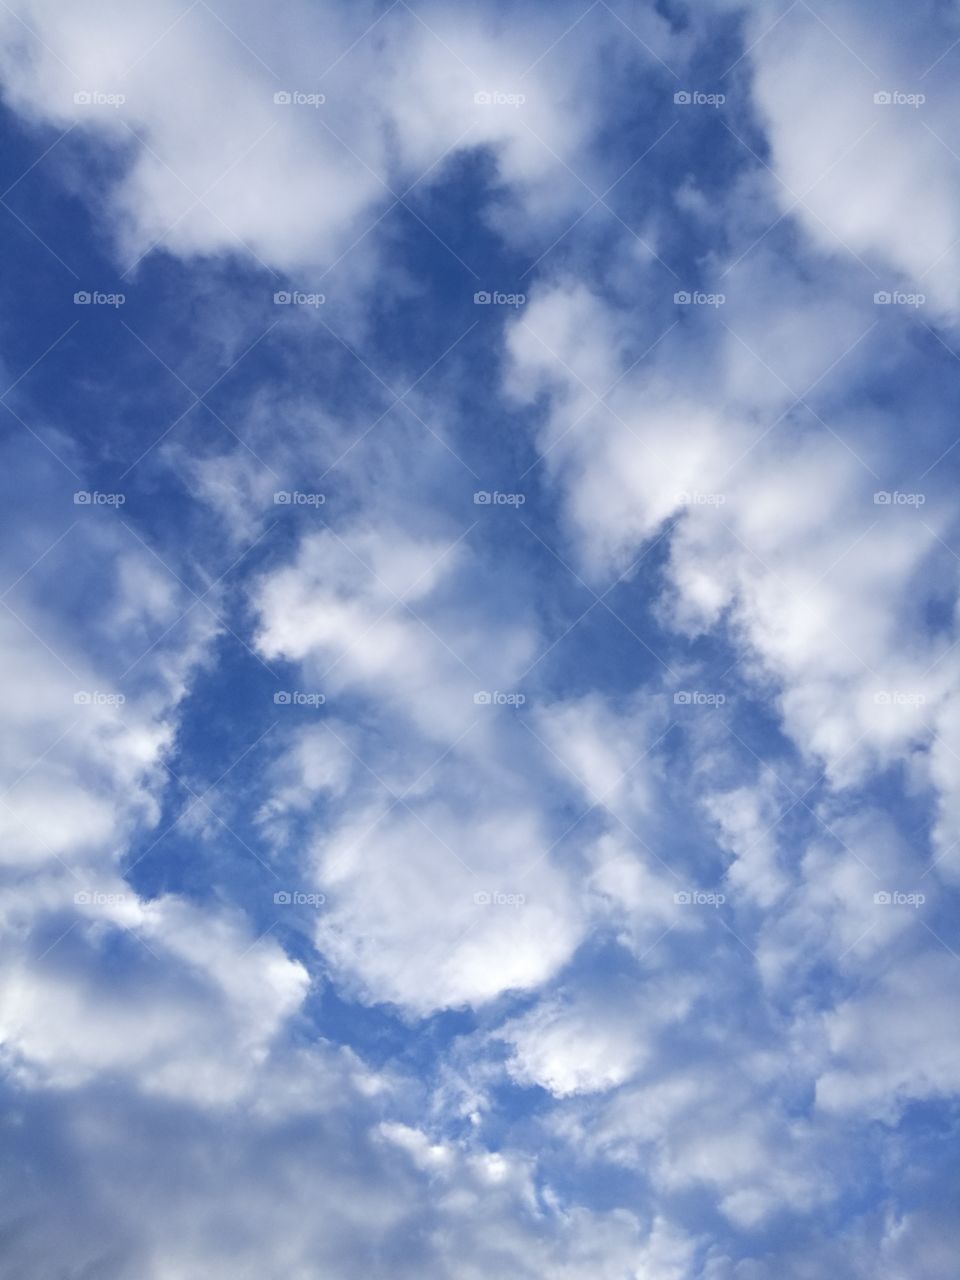 Background of beautiful white clouds on blue sky.